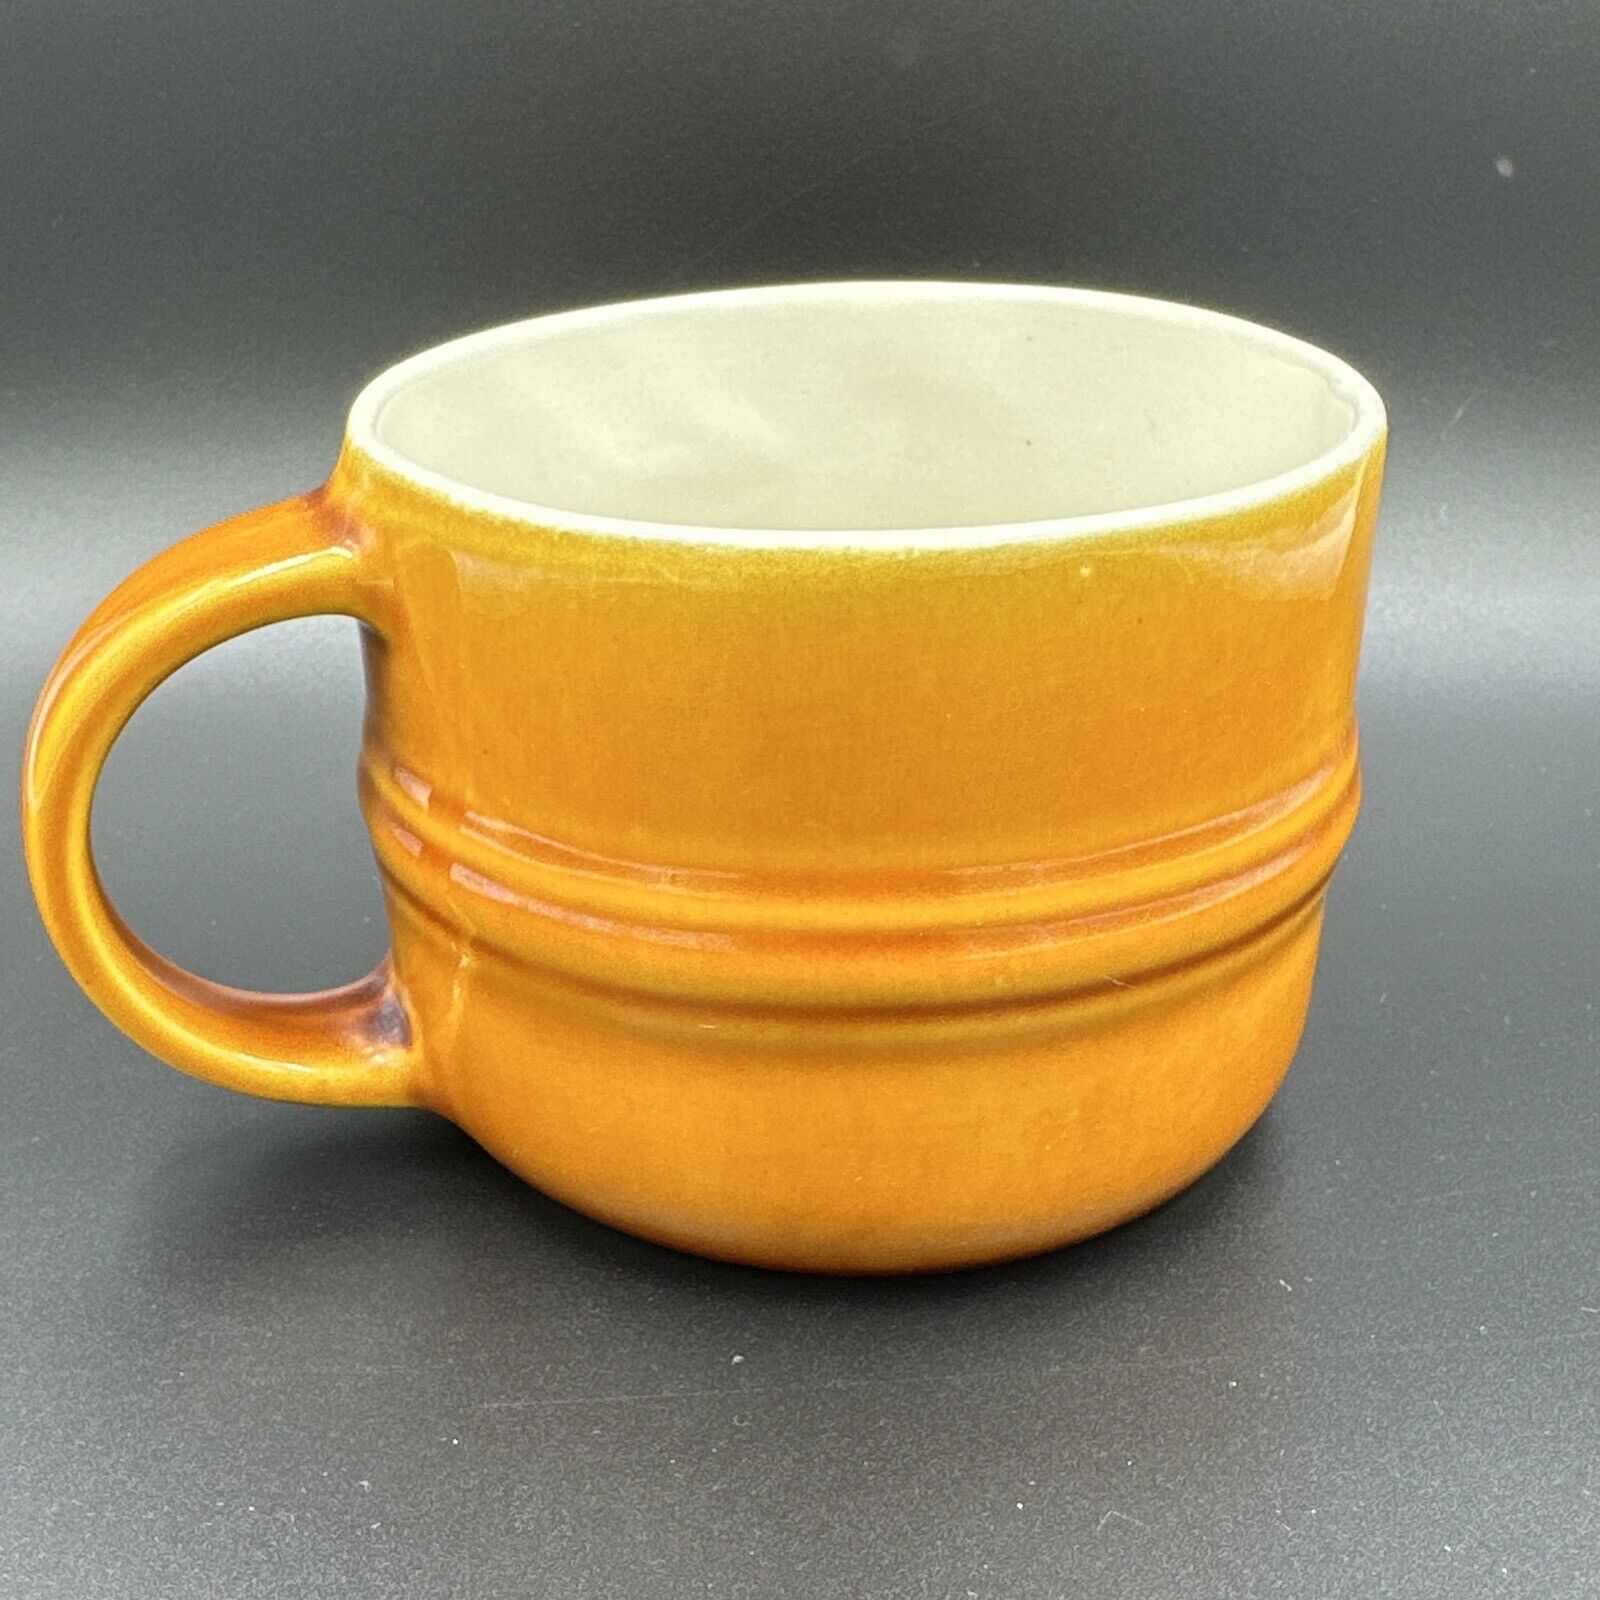 Vintage Secla Golden Banded 3” Coffee Mug made in Portugal  1960’s  Rare